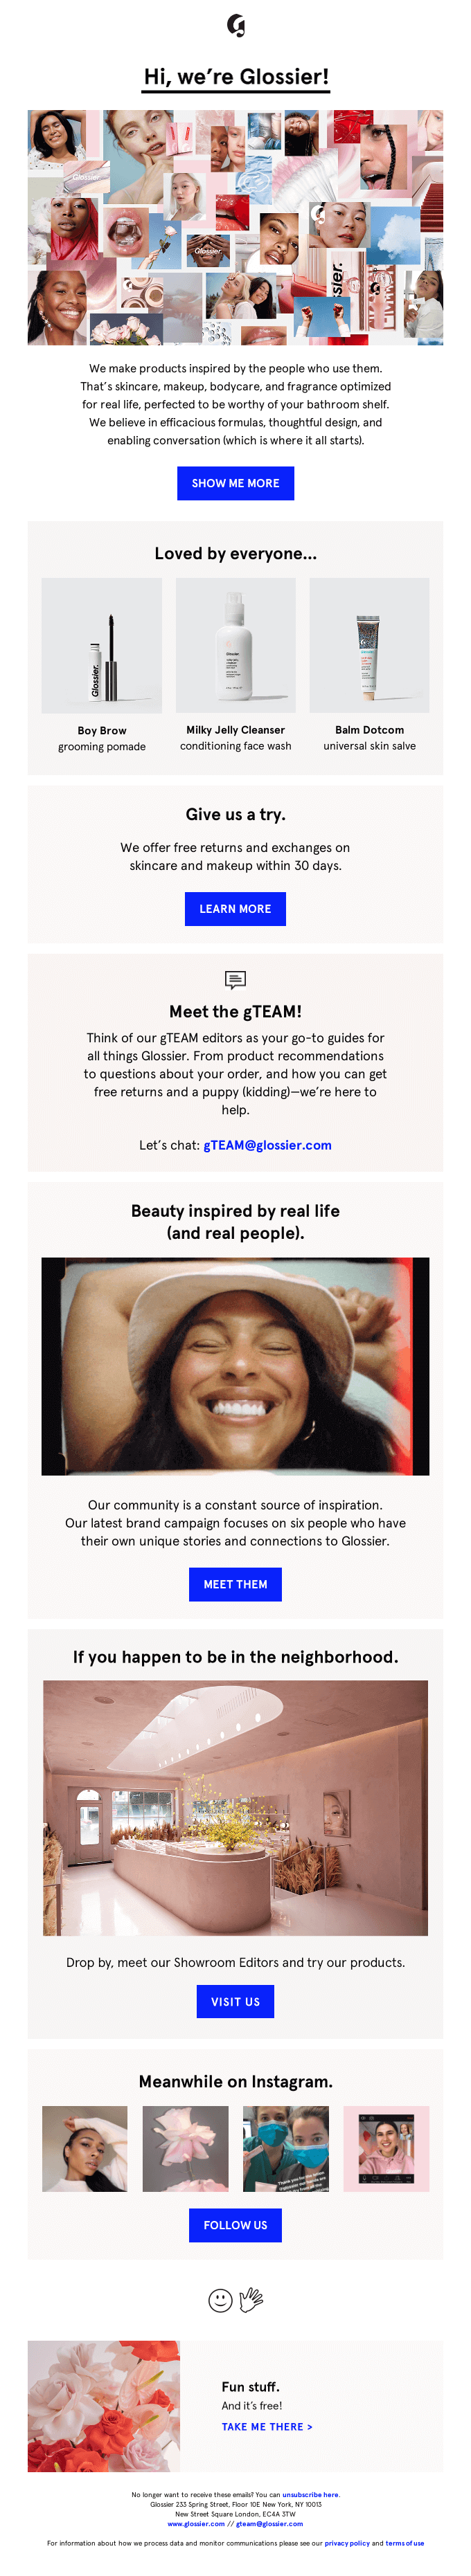 Glossier welcome email with product cards and photos of real users